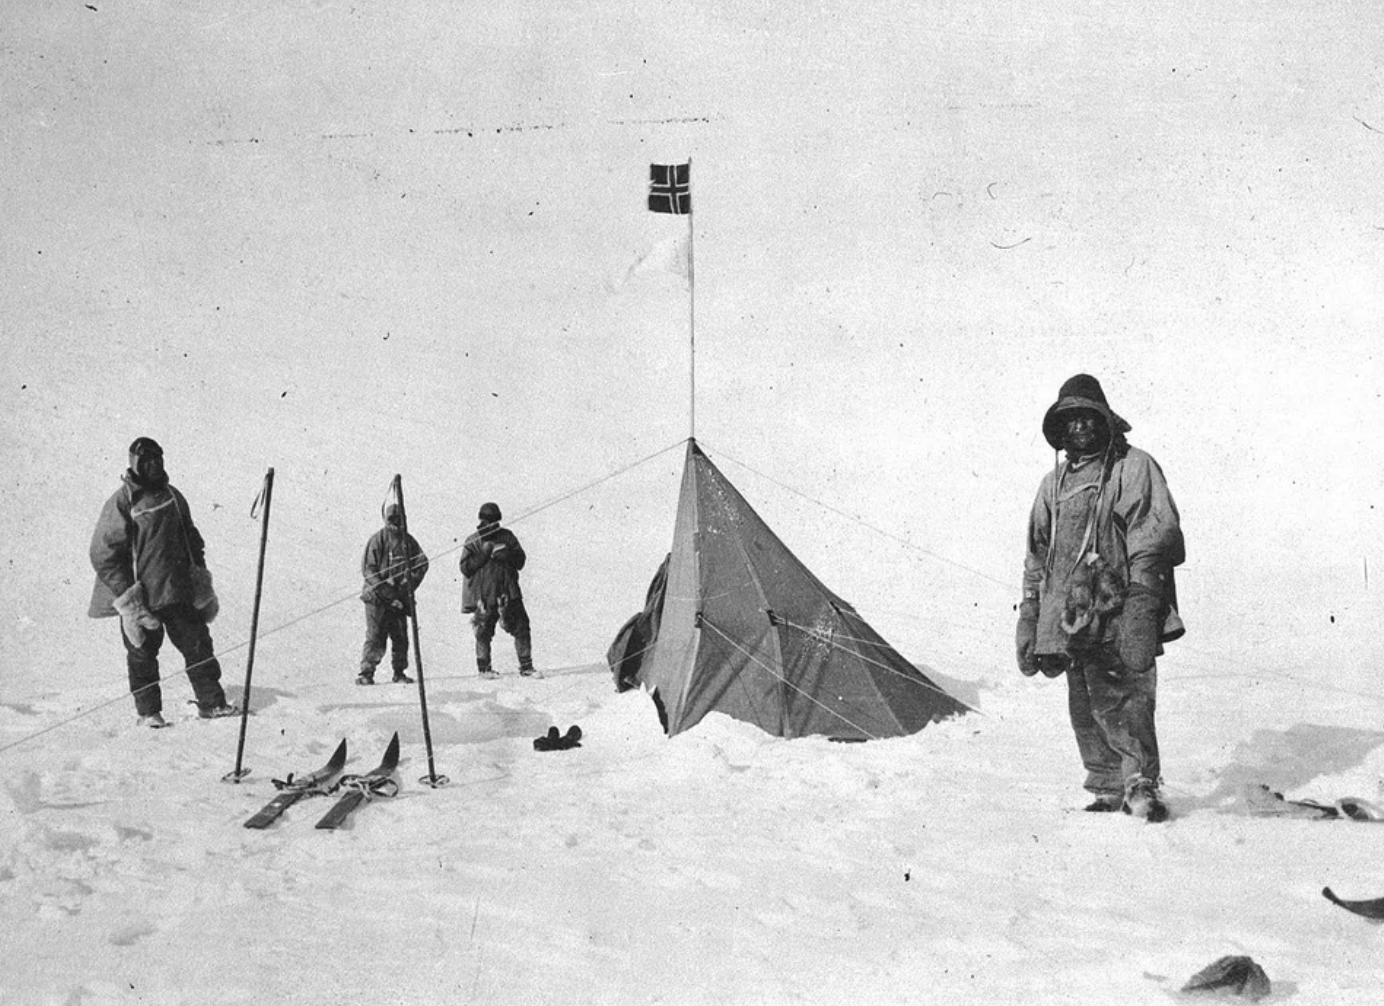 Robert Falcon Scott reaching the South Pole only to find that Amundsen had gotten there first due to the Norwegian flag being planted. 17th of January, 1912.